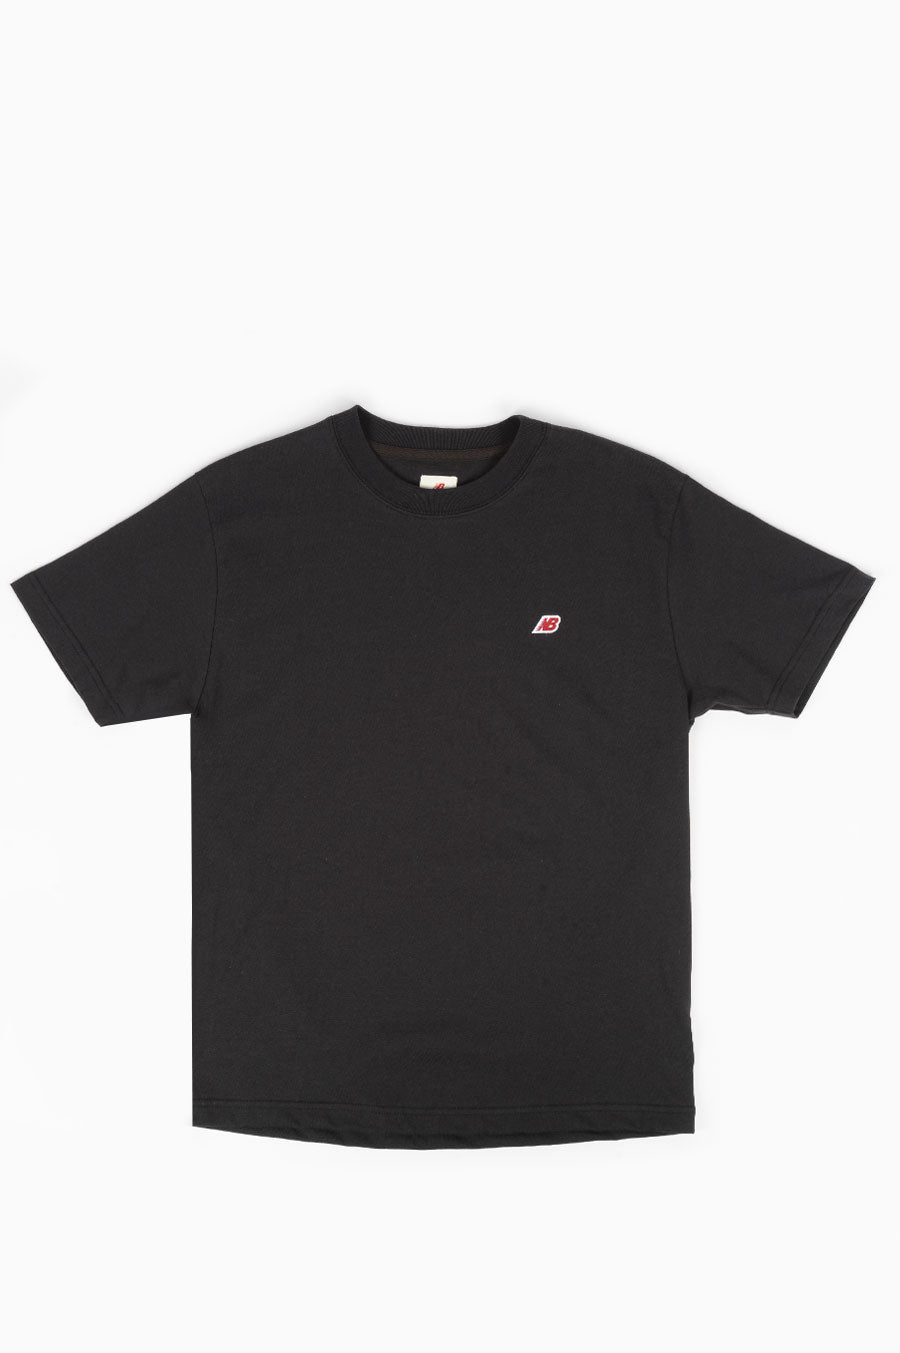 NEW BALANCE MADE IN BLENDS – USA TEE BLACK SS